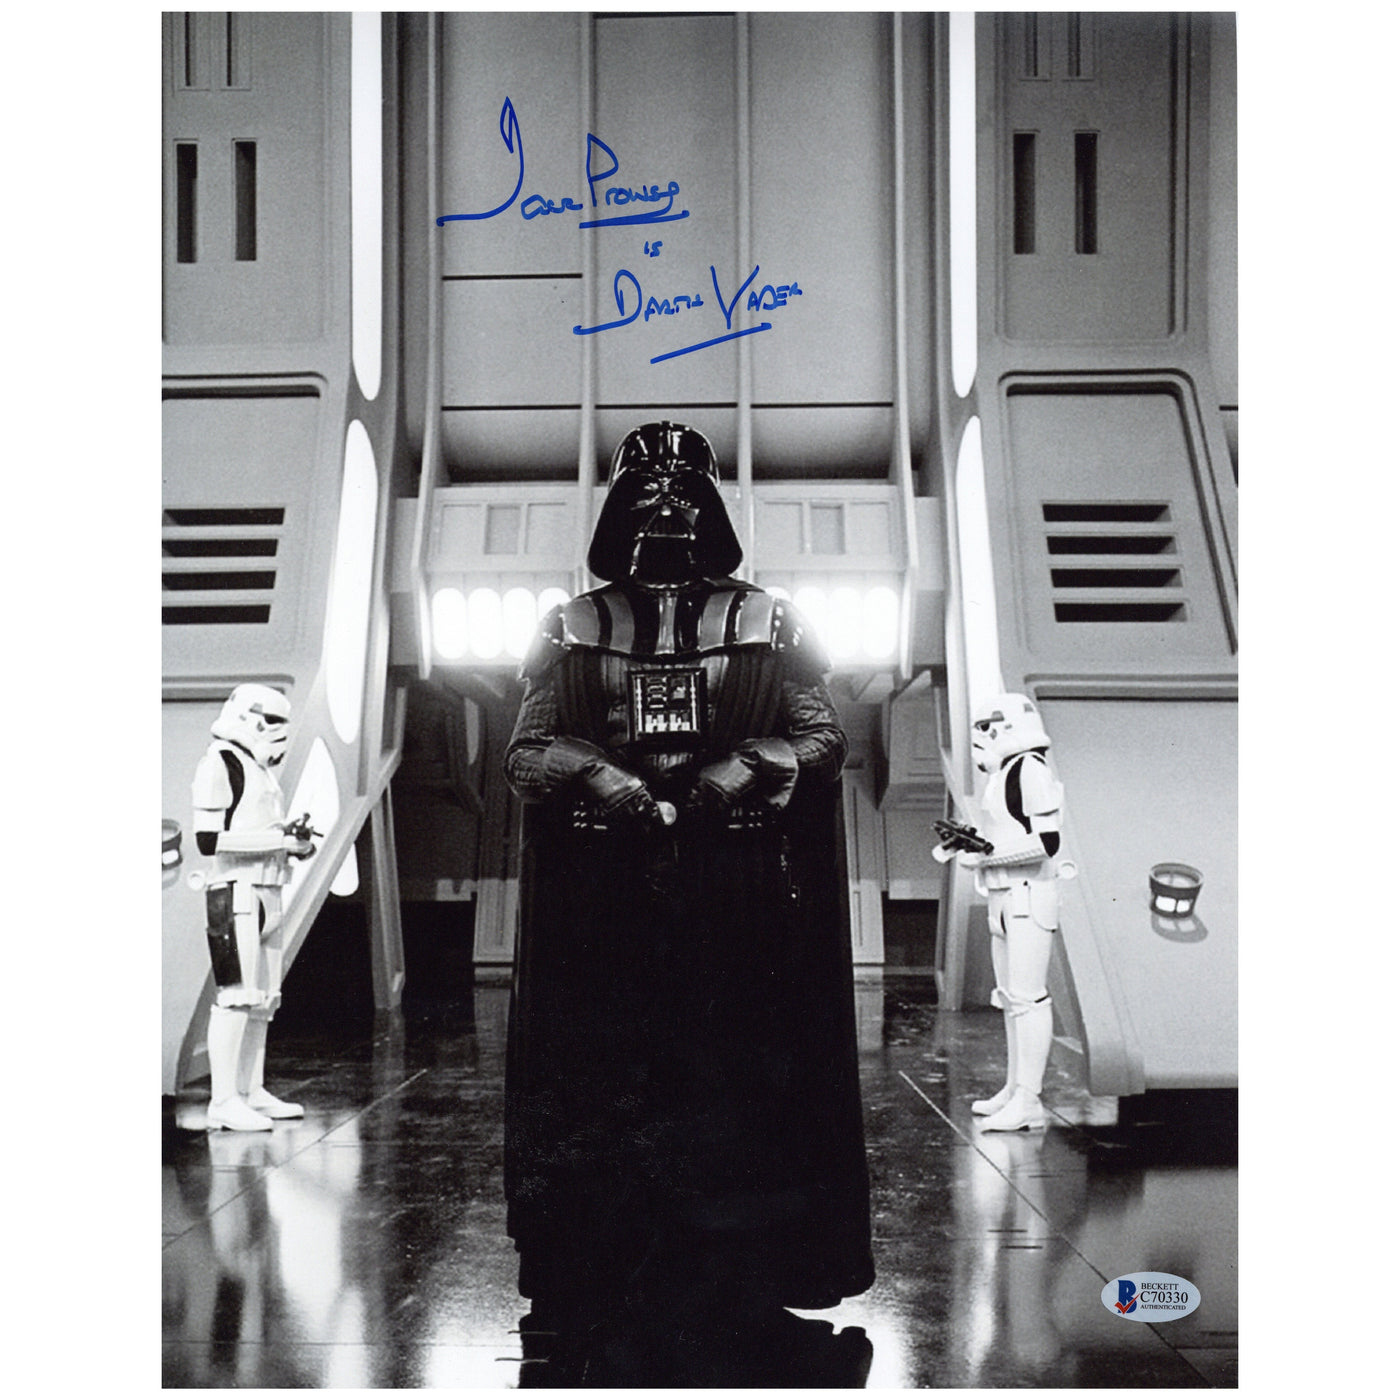 Dave Prowse Signed 11x14 Photo Star Wars Darth Vader Autographed Beckett COA